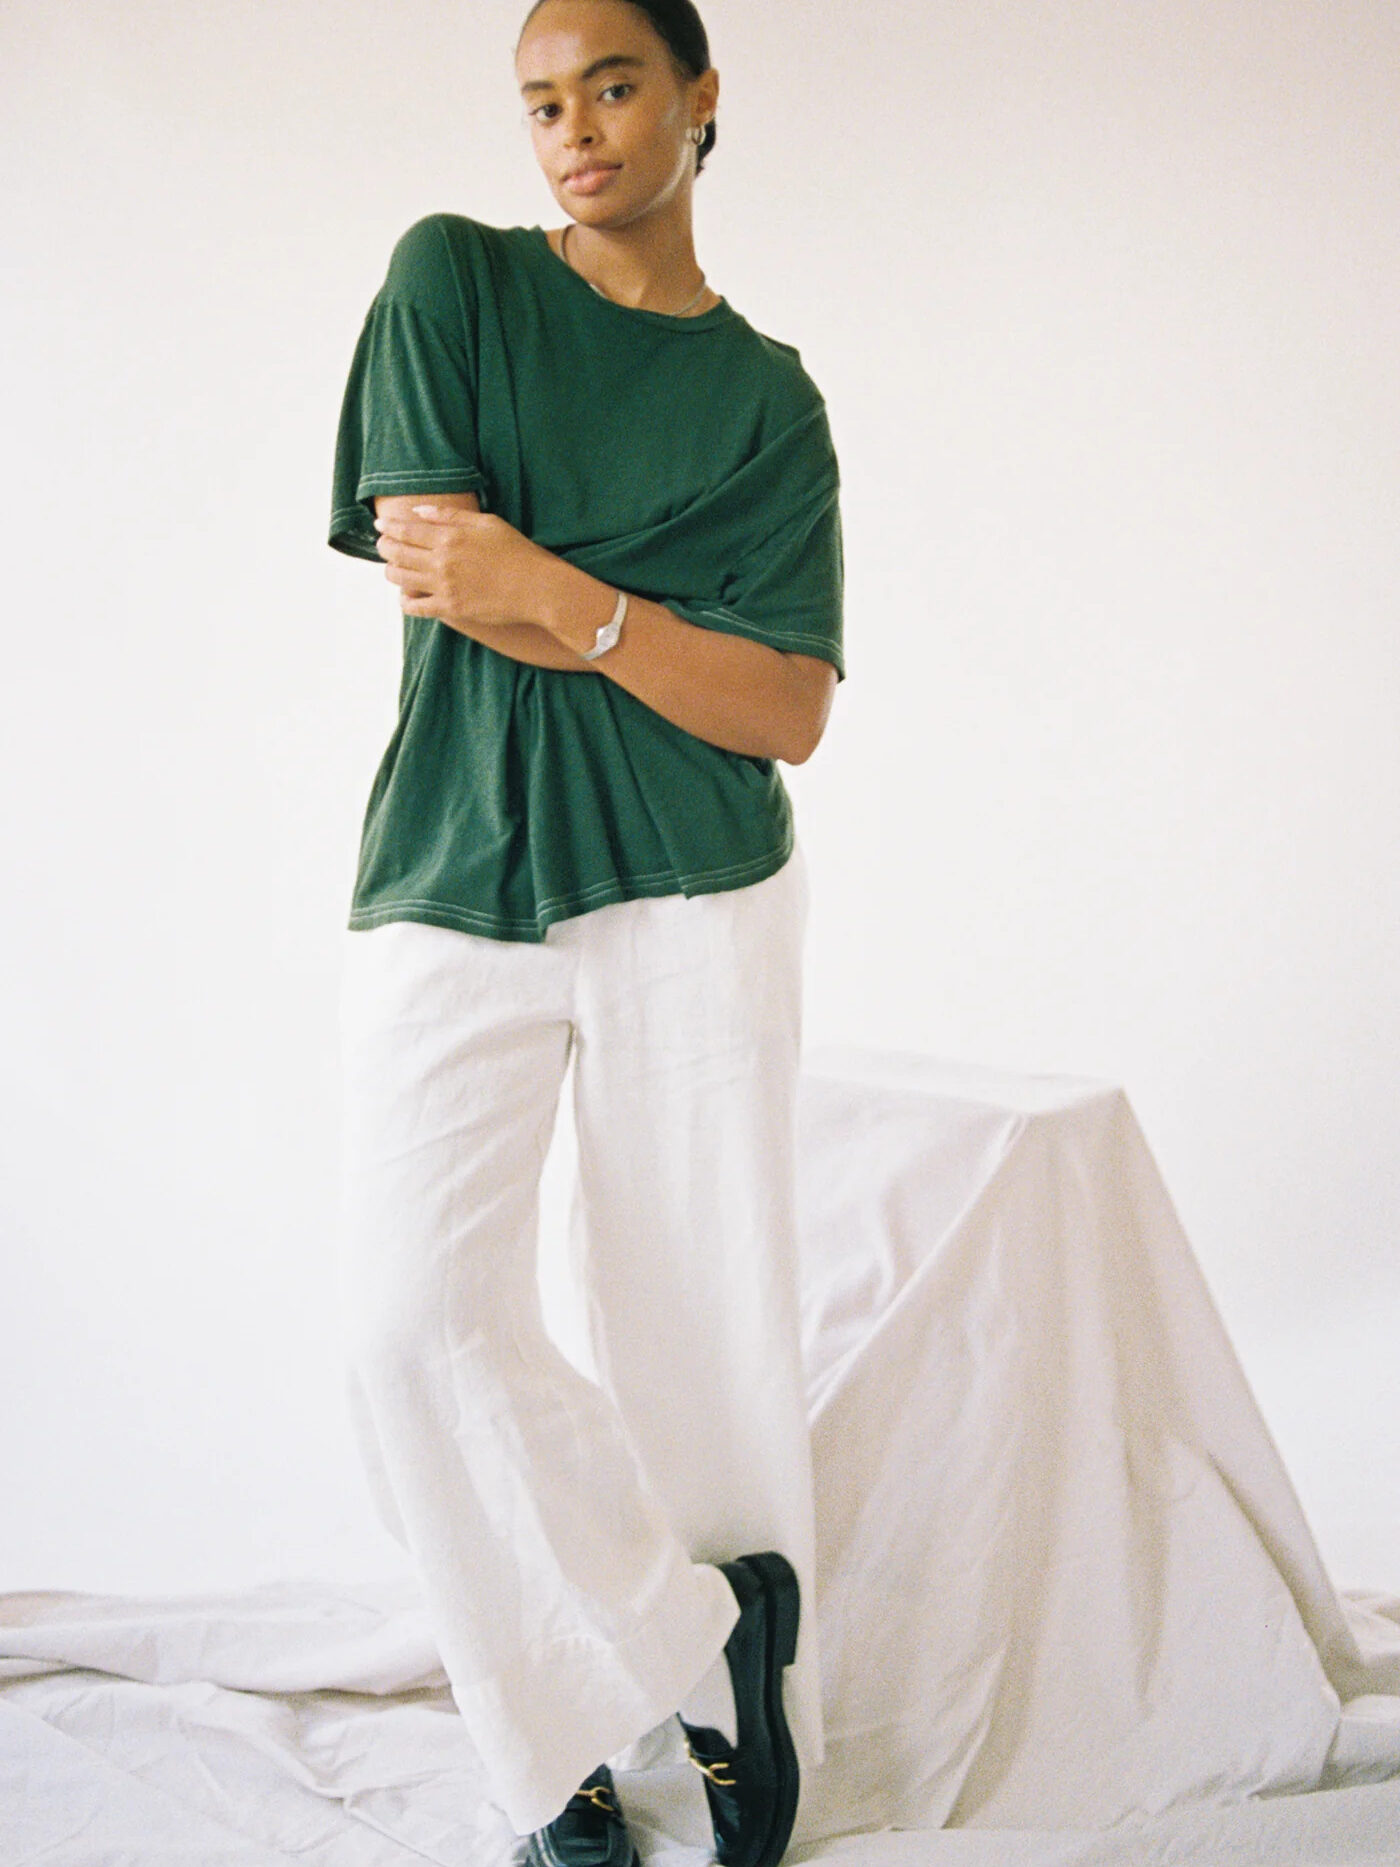 A person in a green t-shirt and white pants stands confidently against a plain backdrop, with one arm crossed.